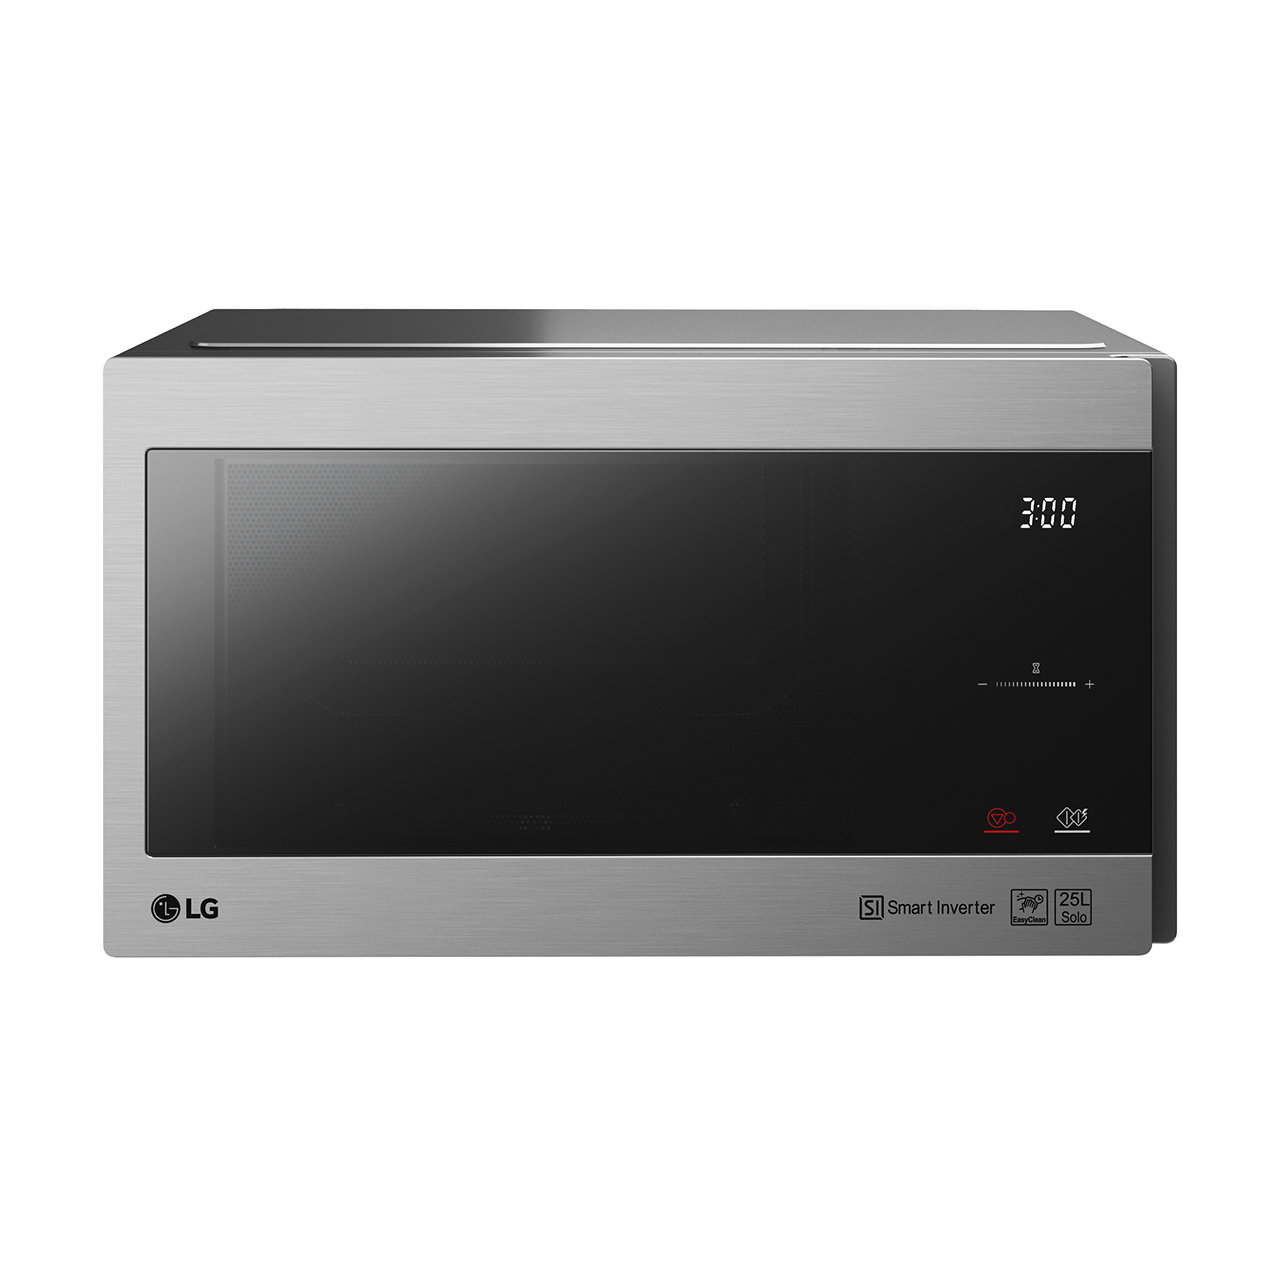 solo-microwave-smart-inverter-ms2595cis-by-lg.jpg